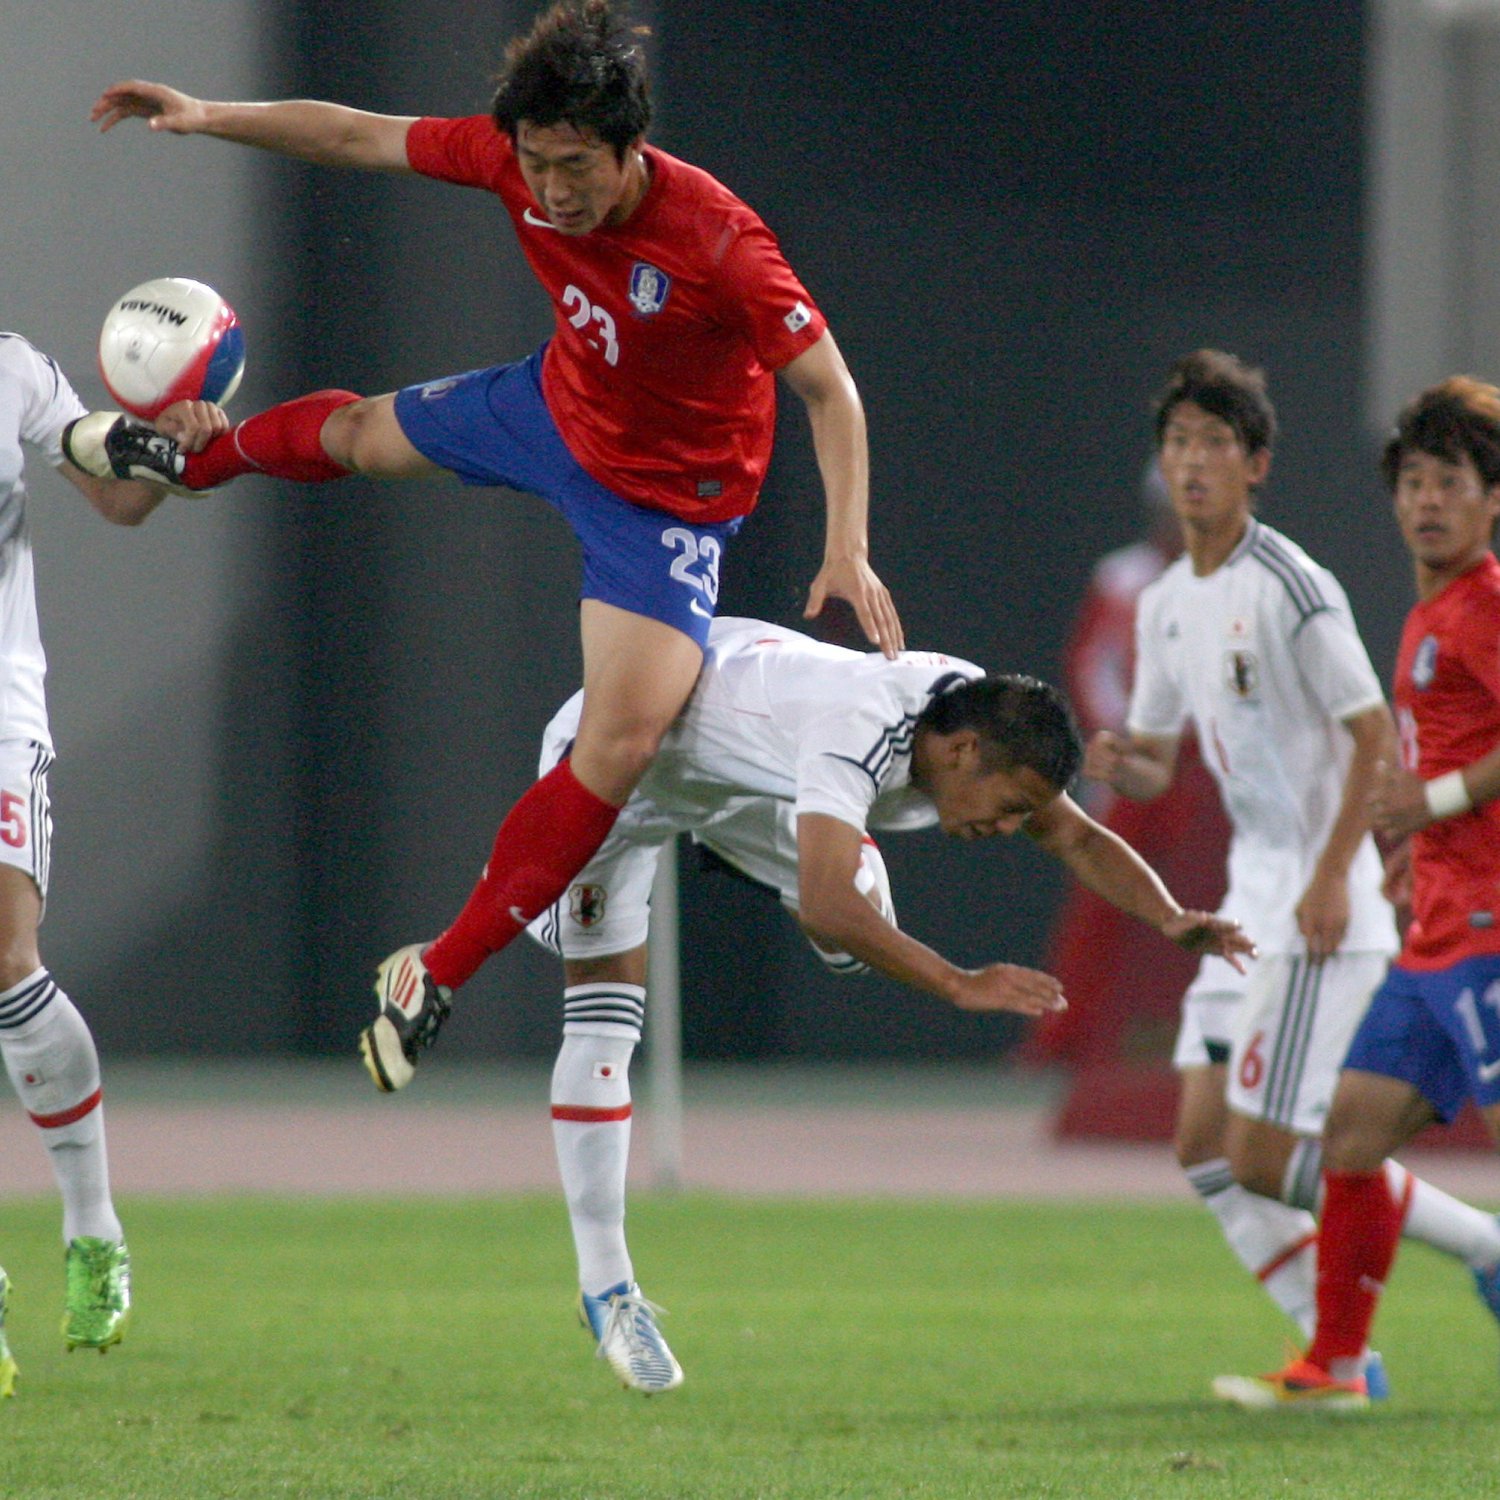  - hi-res-183648644-takuya-kida-of-japan-competes-for-the-ball-with-kwak_crop_exact